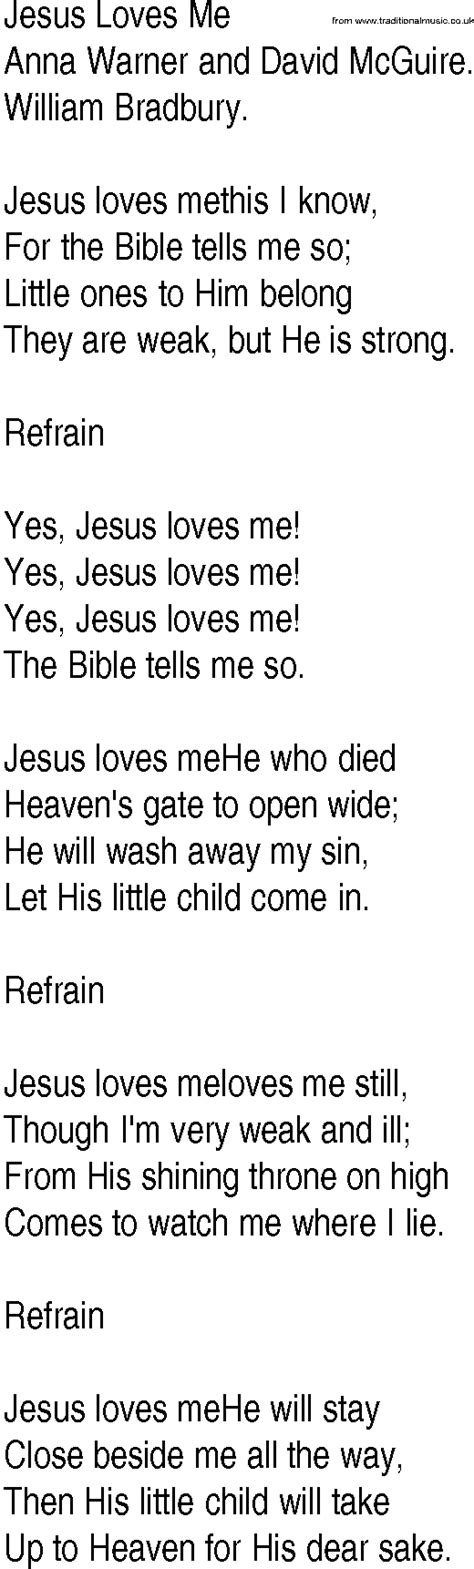 Hymn And Gospel Song Lyrics For Jesus Loves Me By Anna Warner And David